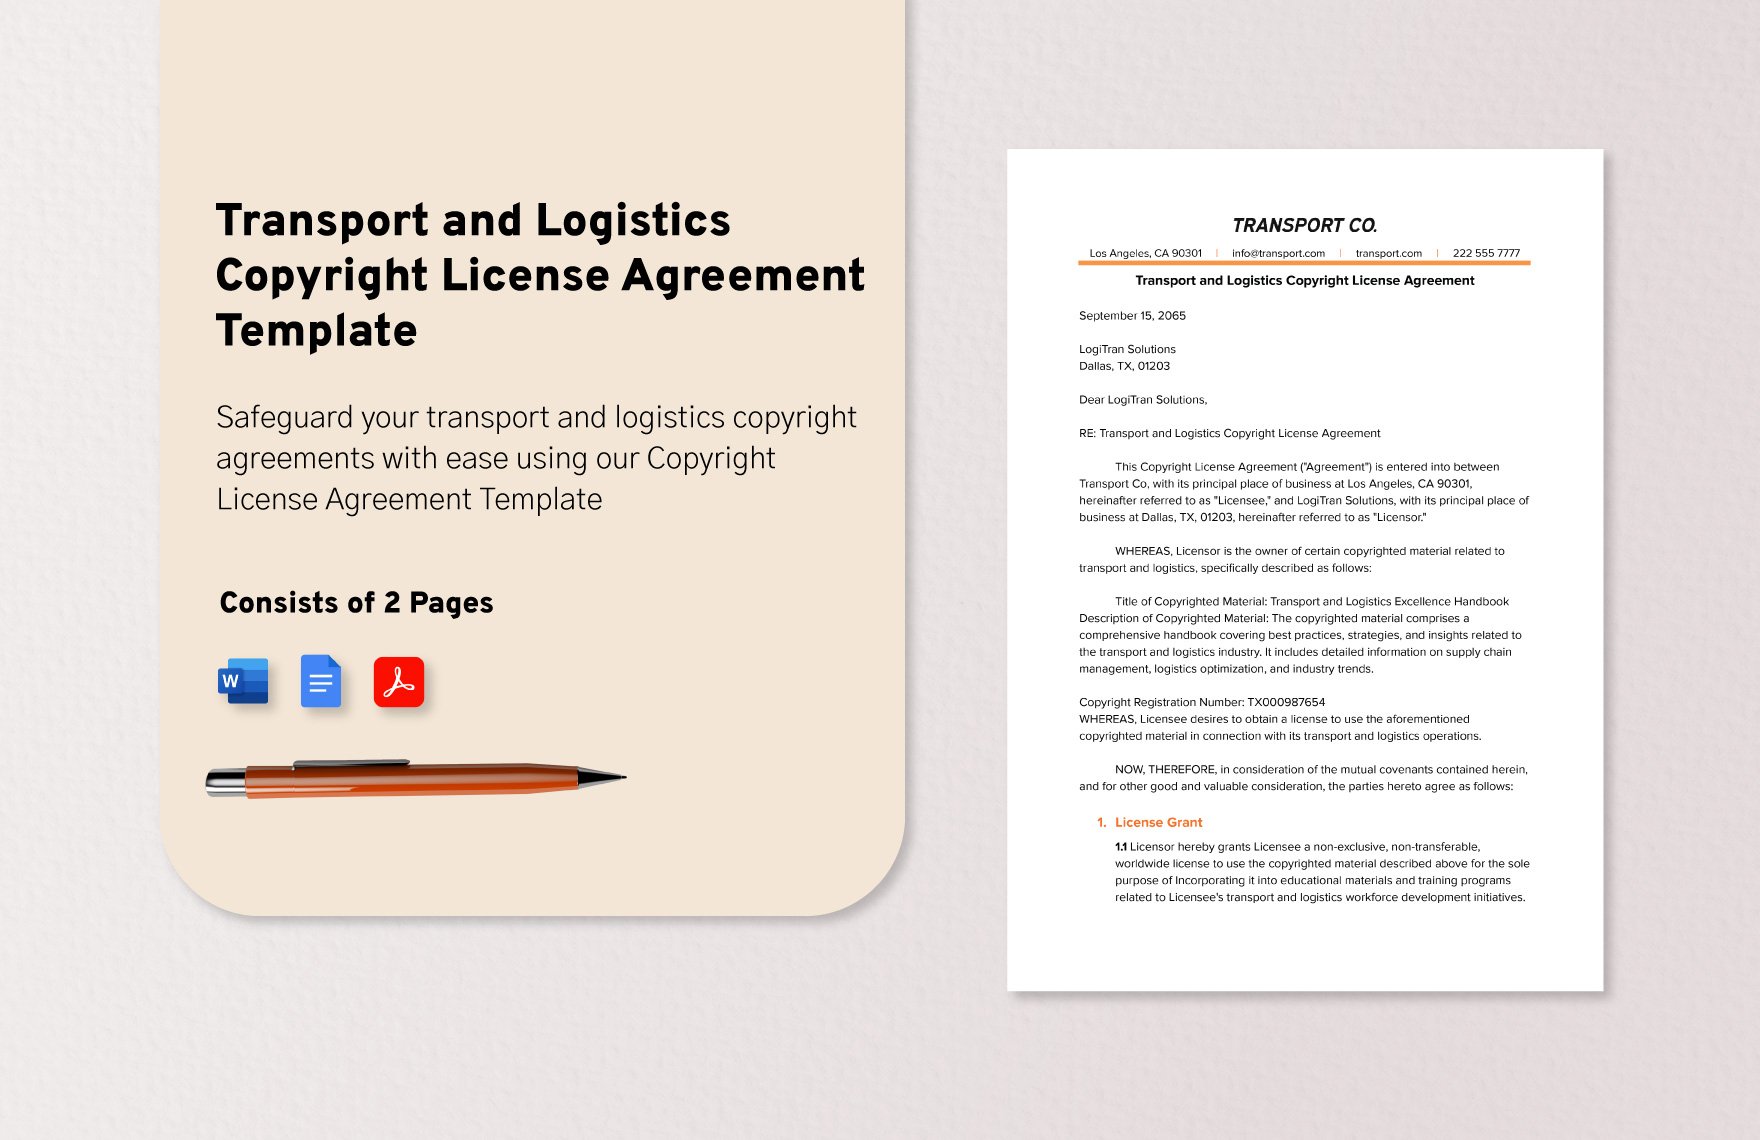 Transport and Logistics Copyright License Agreement Template